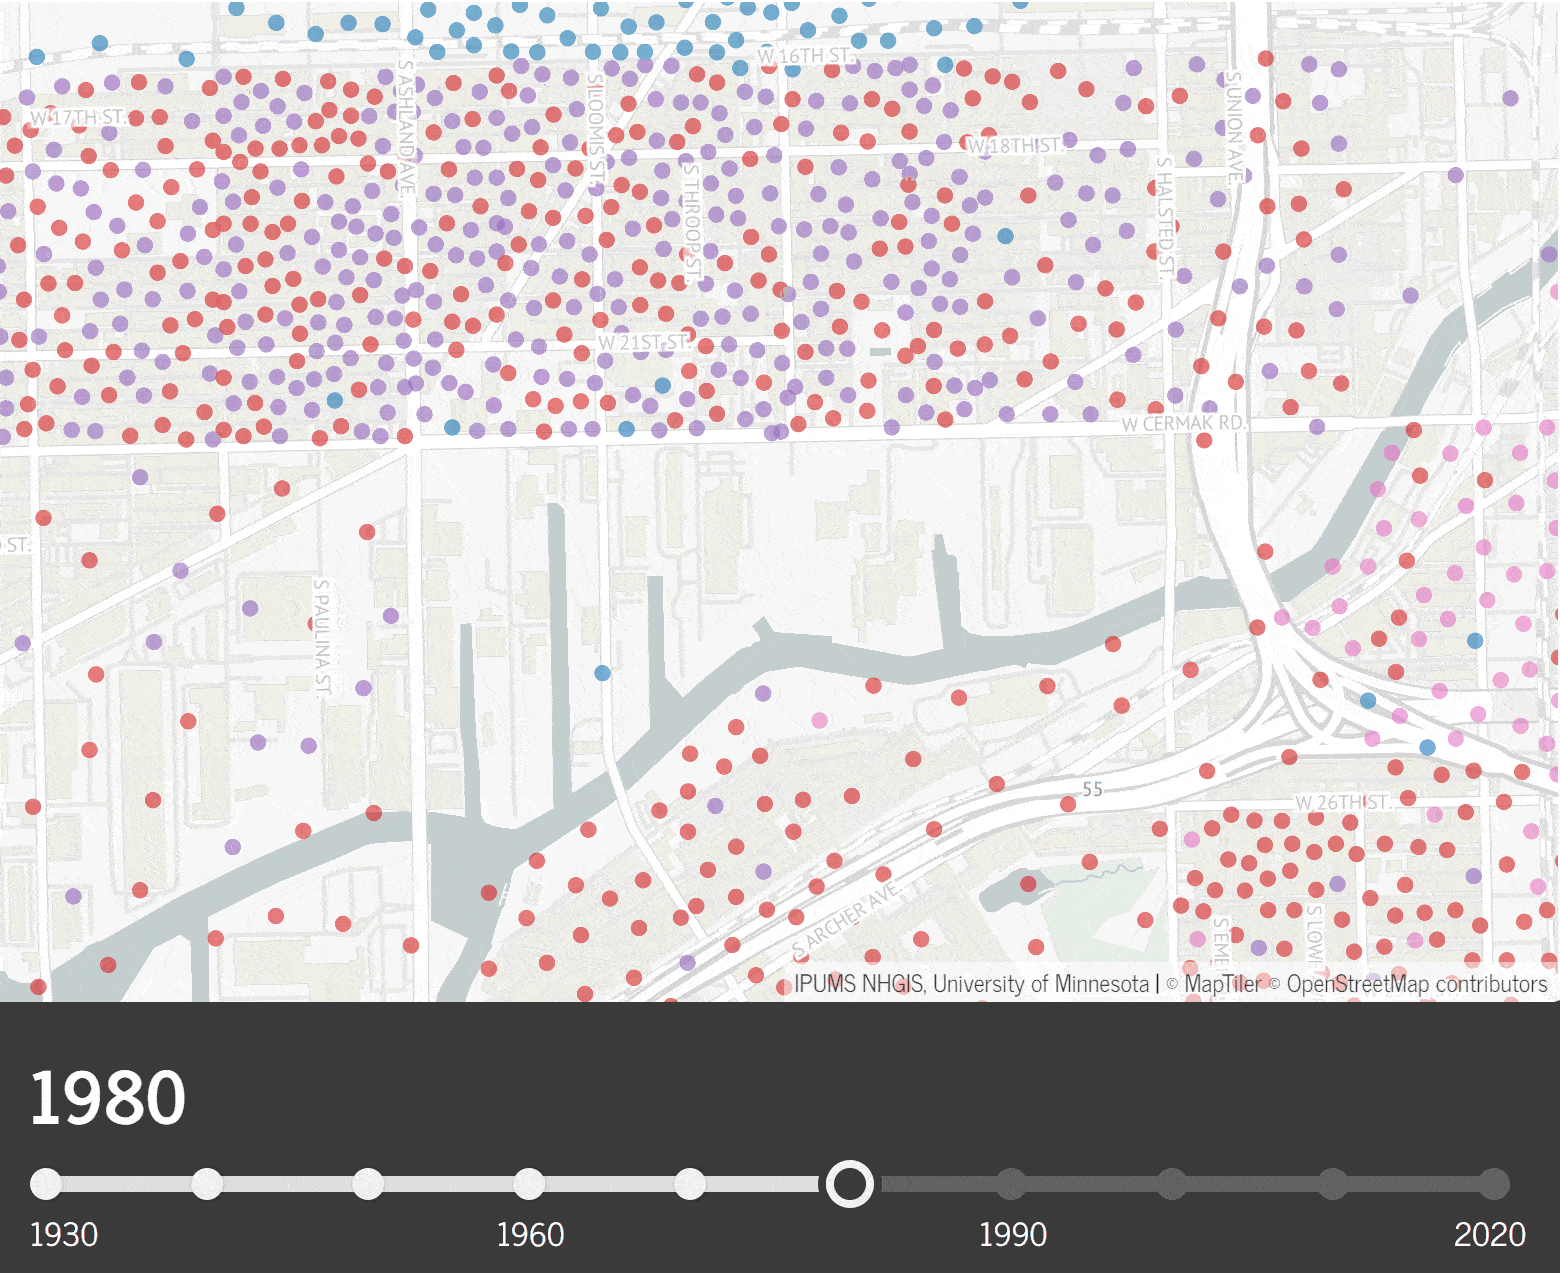 An animated gif of demographic maps of the Pilsen neighborhood in Chicago from 1980 to 2020. Starting in 1980 the neighborhood had a majority White population until 1990 when the demographics shifted to a majority Latino population. On the side of the graph is a key describing the marked dots on the maps.